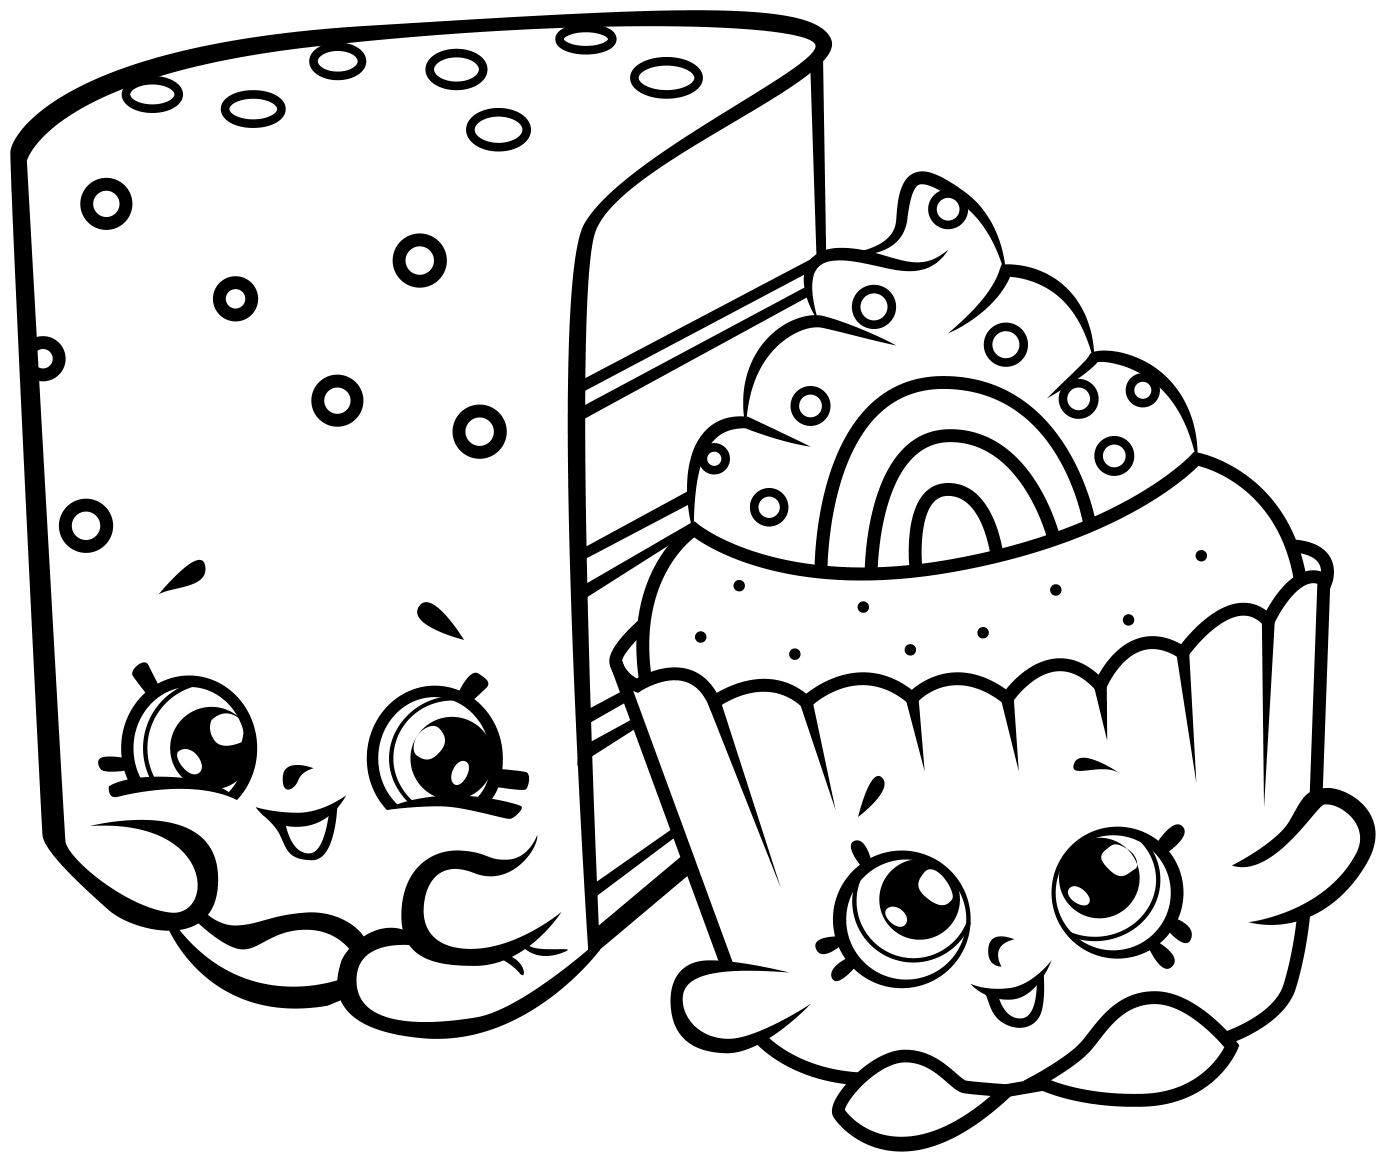 Coloring Pages : Coloring Pages Shopkinsle Sheets For Kids - Free Printable Coloring Pages